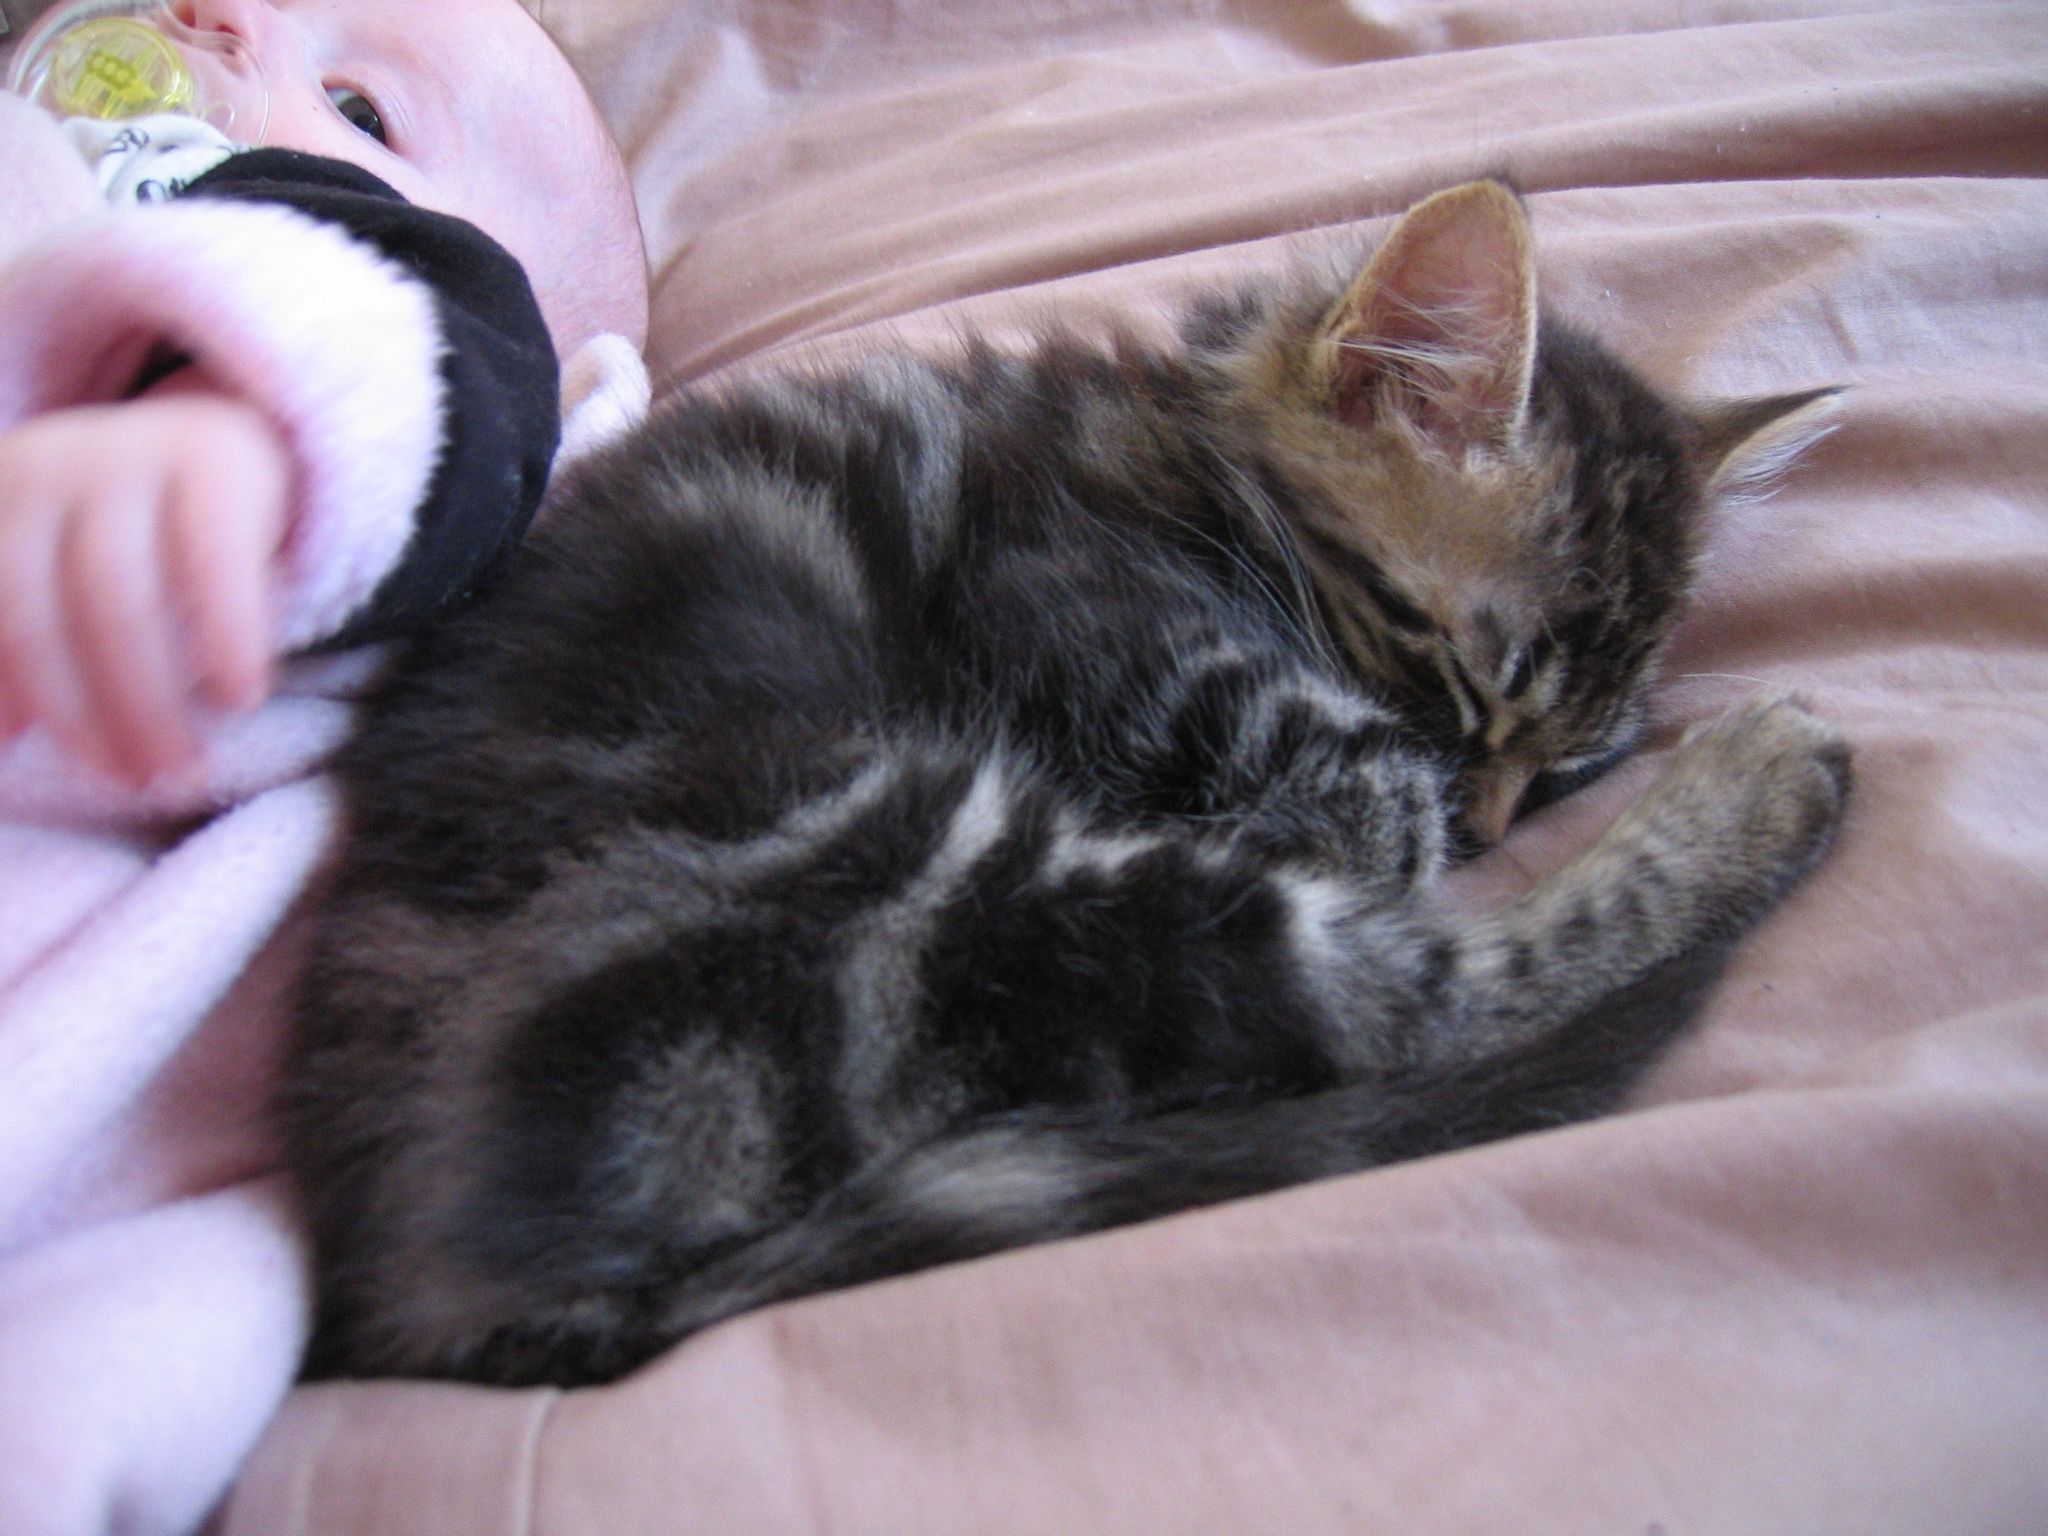 A close-up photo of the same tabby kitten curled up asleep.